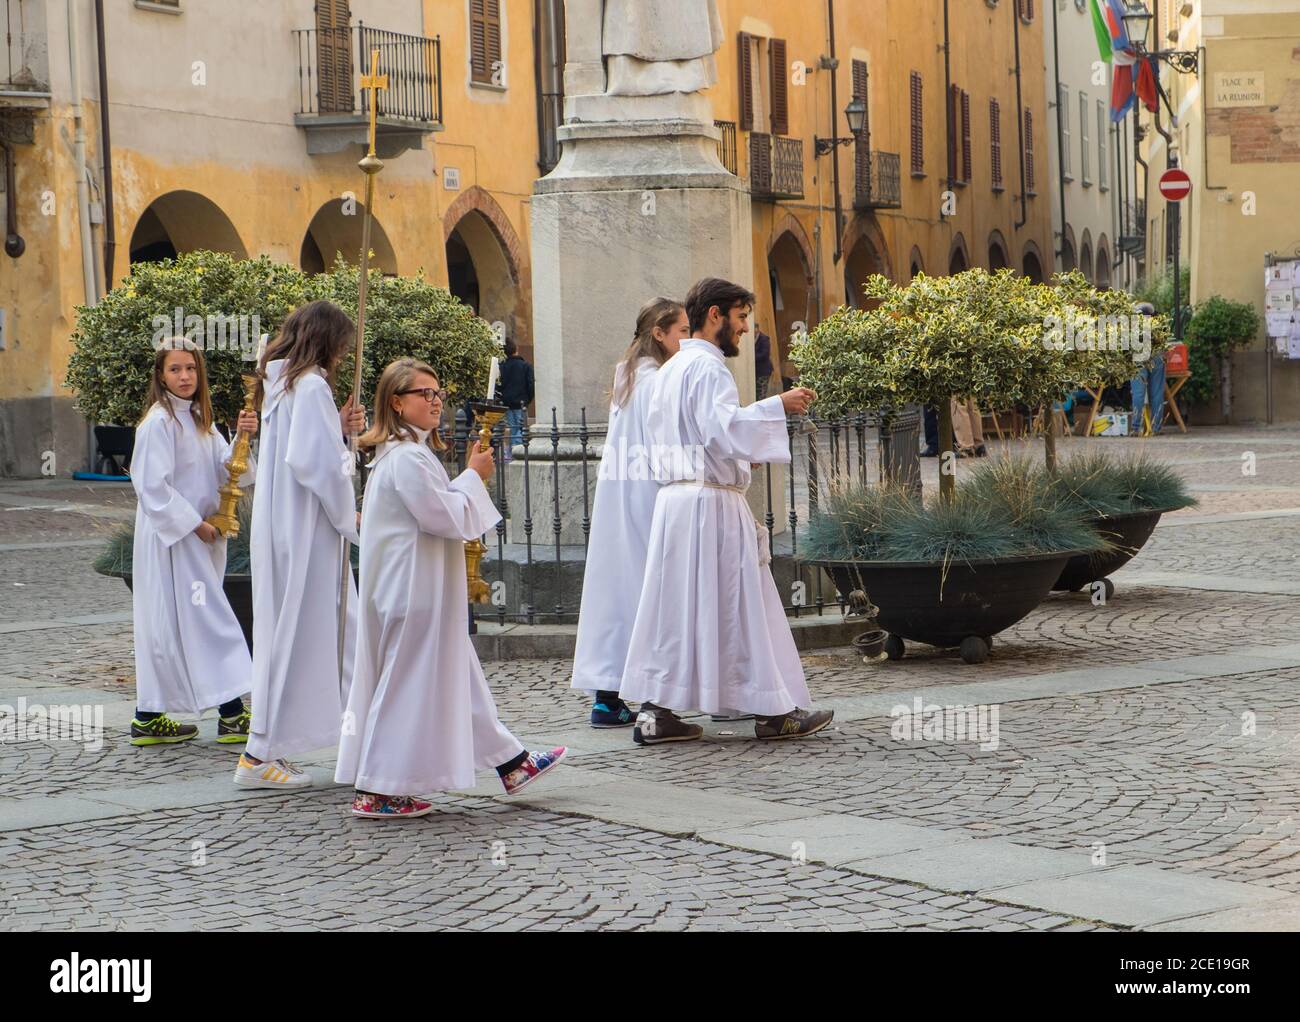 Catholic religious procession in the small town of Bene Vagienna, Cuneo, Italy Stock Photo